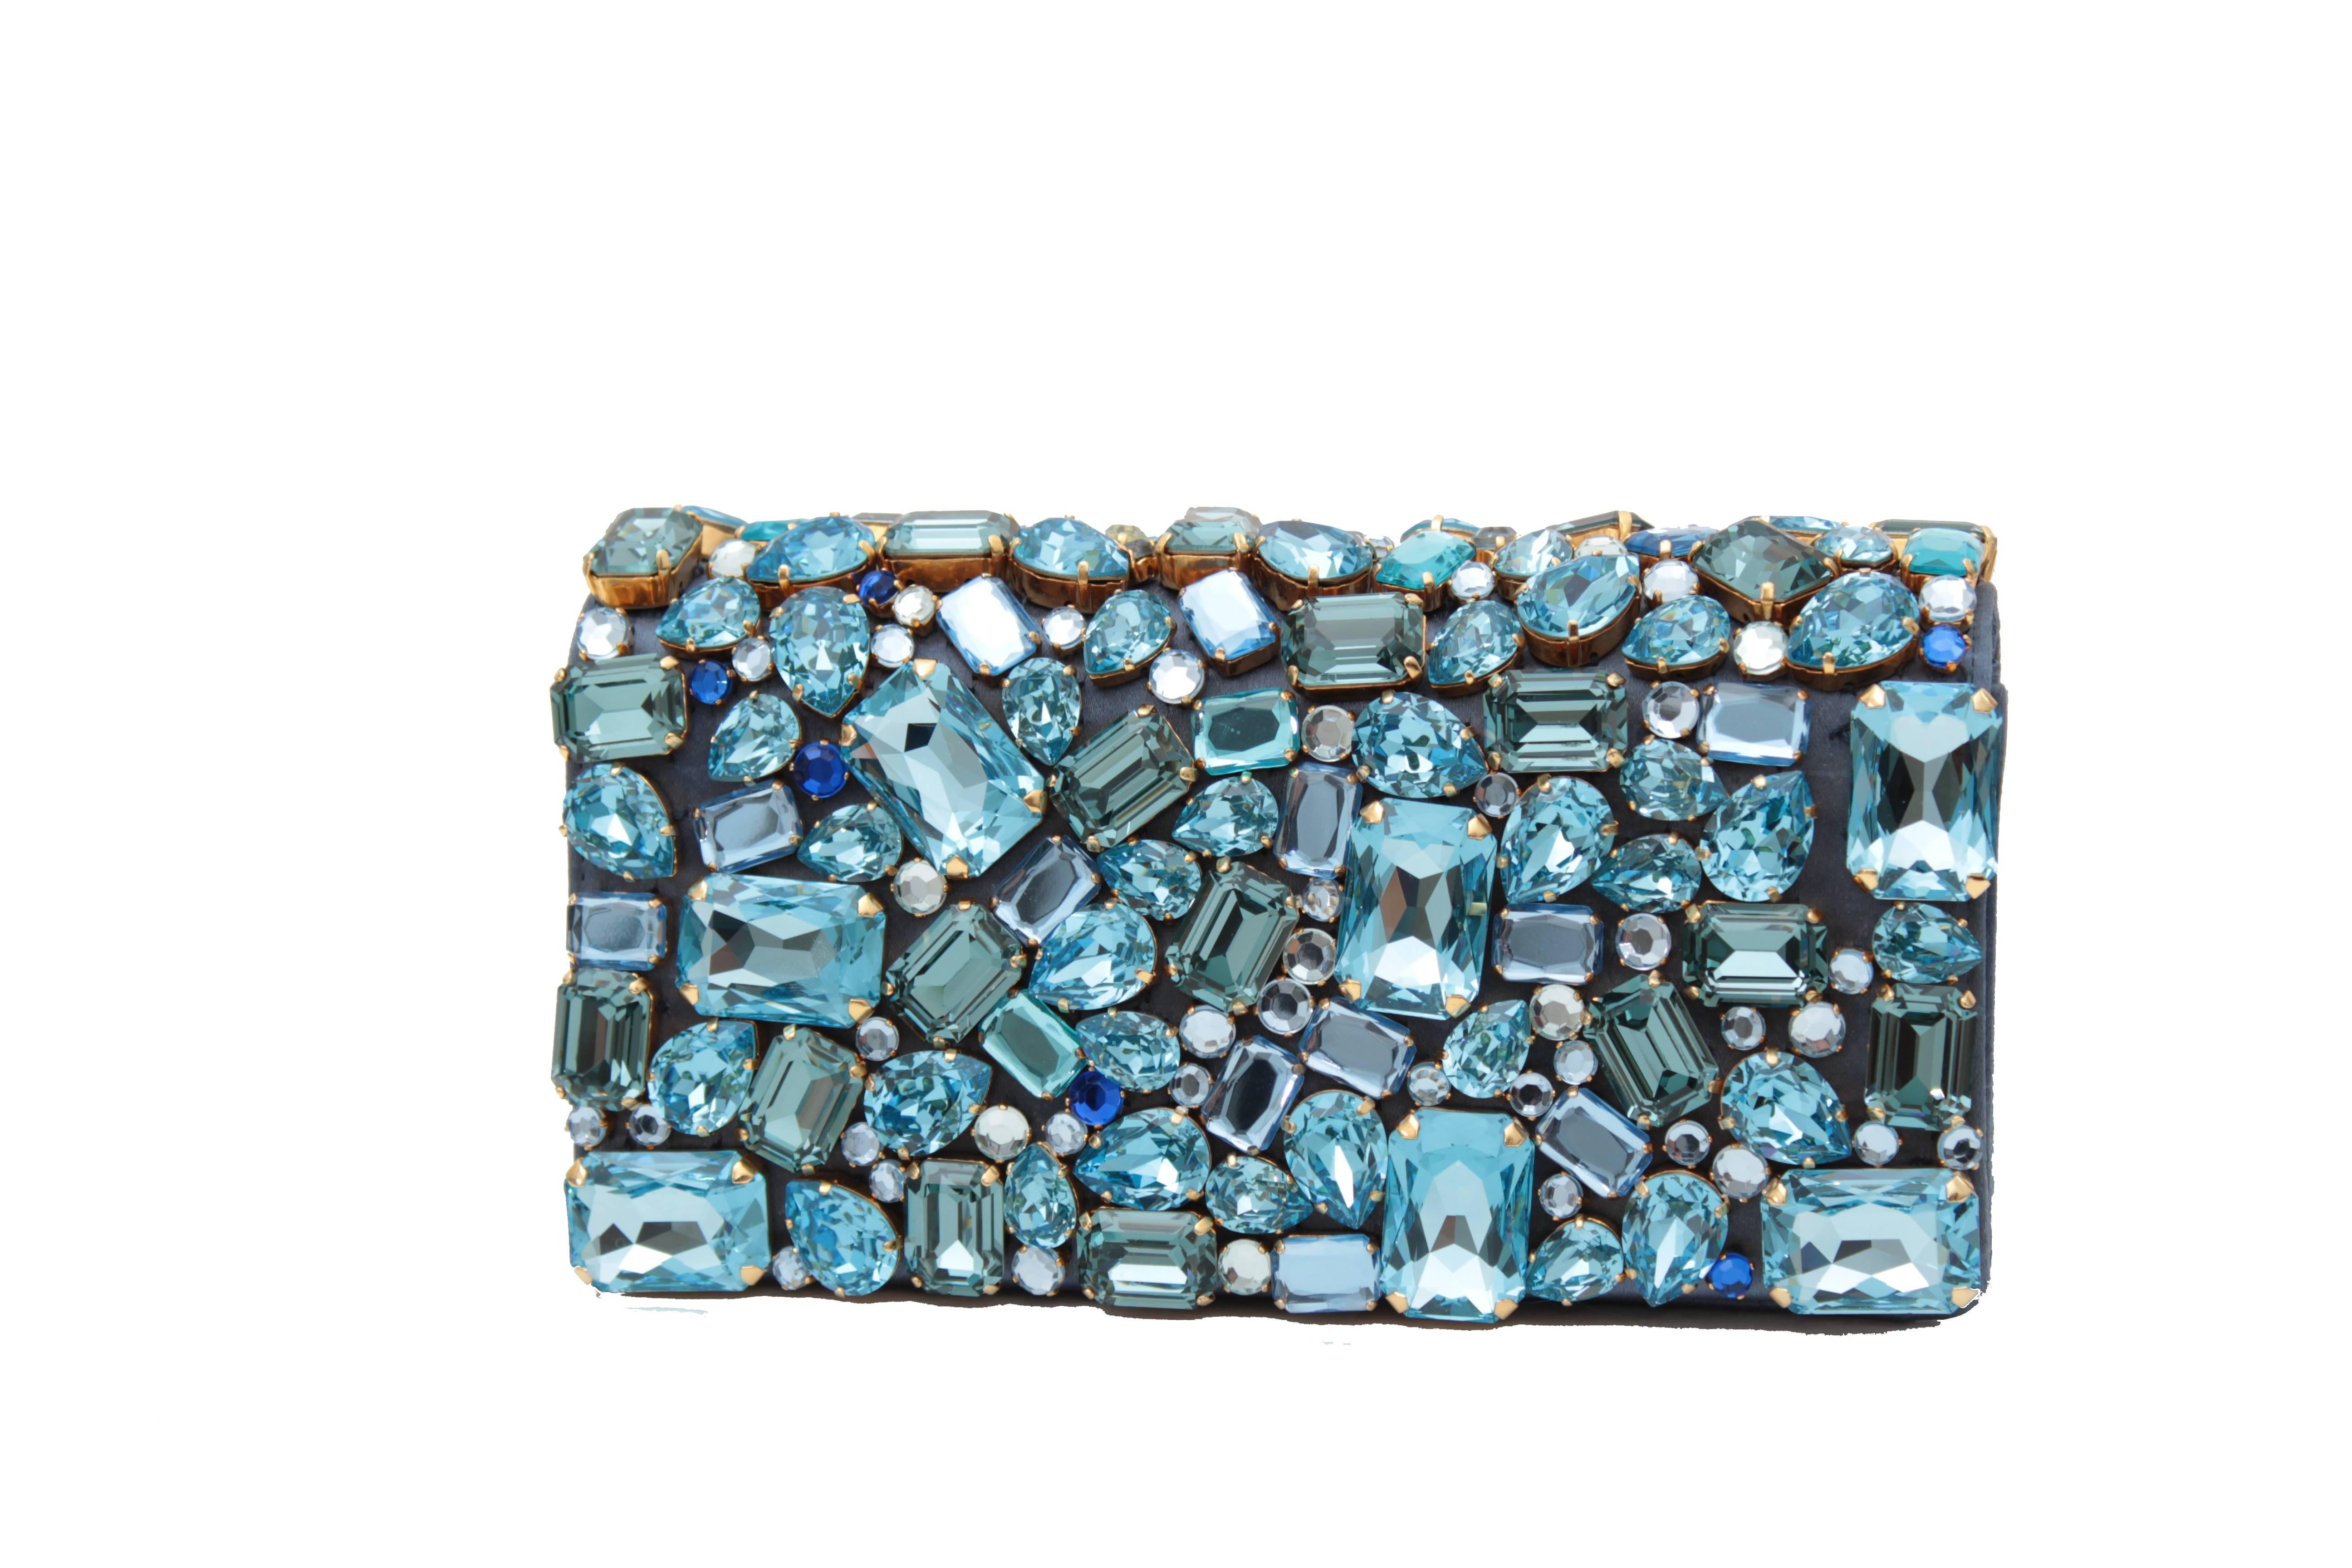 This embellished clutch was made by Prada and features tons of chunky crystals in shades of blue.  Fastens with magnetic clasp on flap and features a small flat open pocket inside.  Comes with its original box.  In excellent preowned condition with